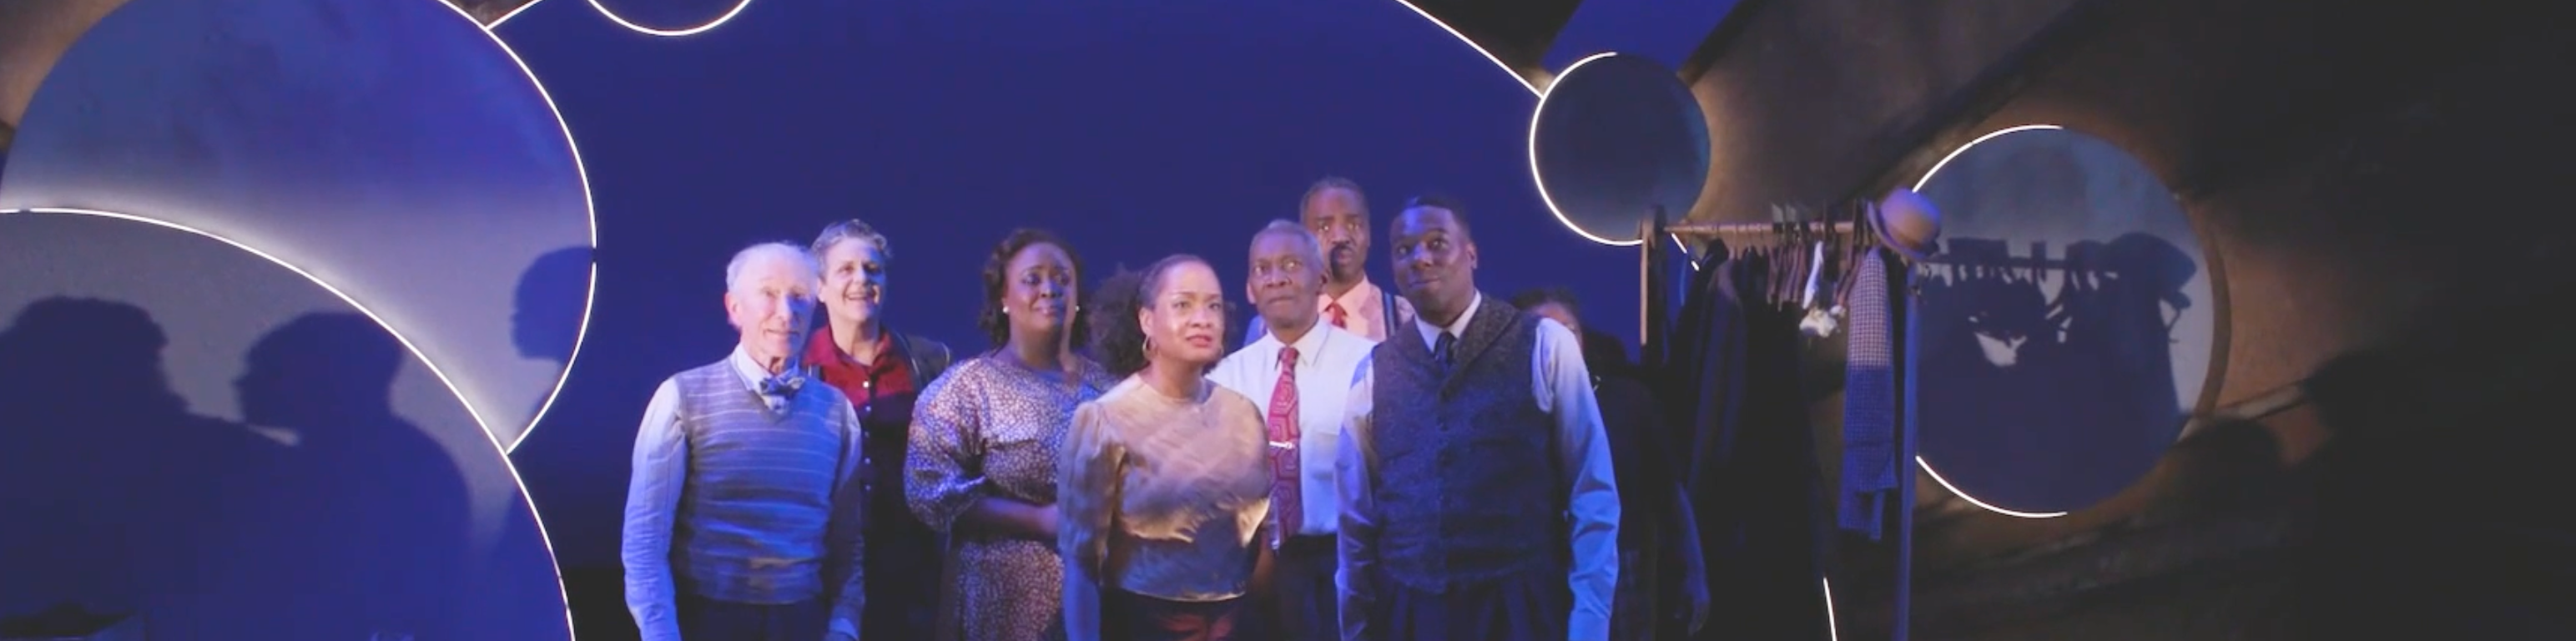 People standing on a stage with circles and looking into the distance